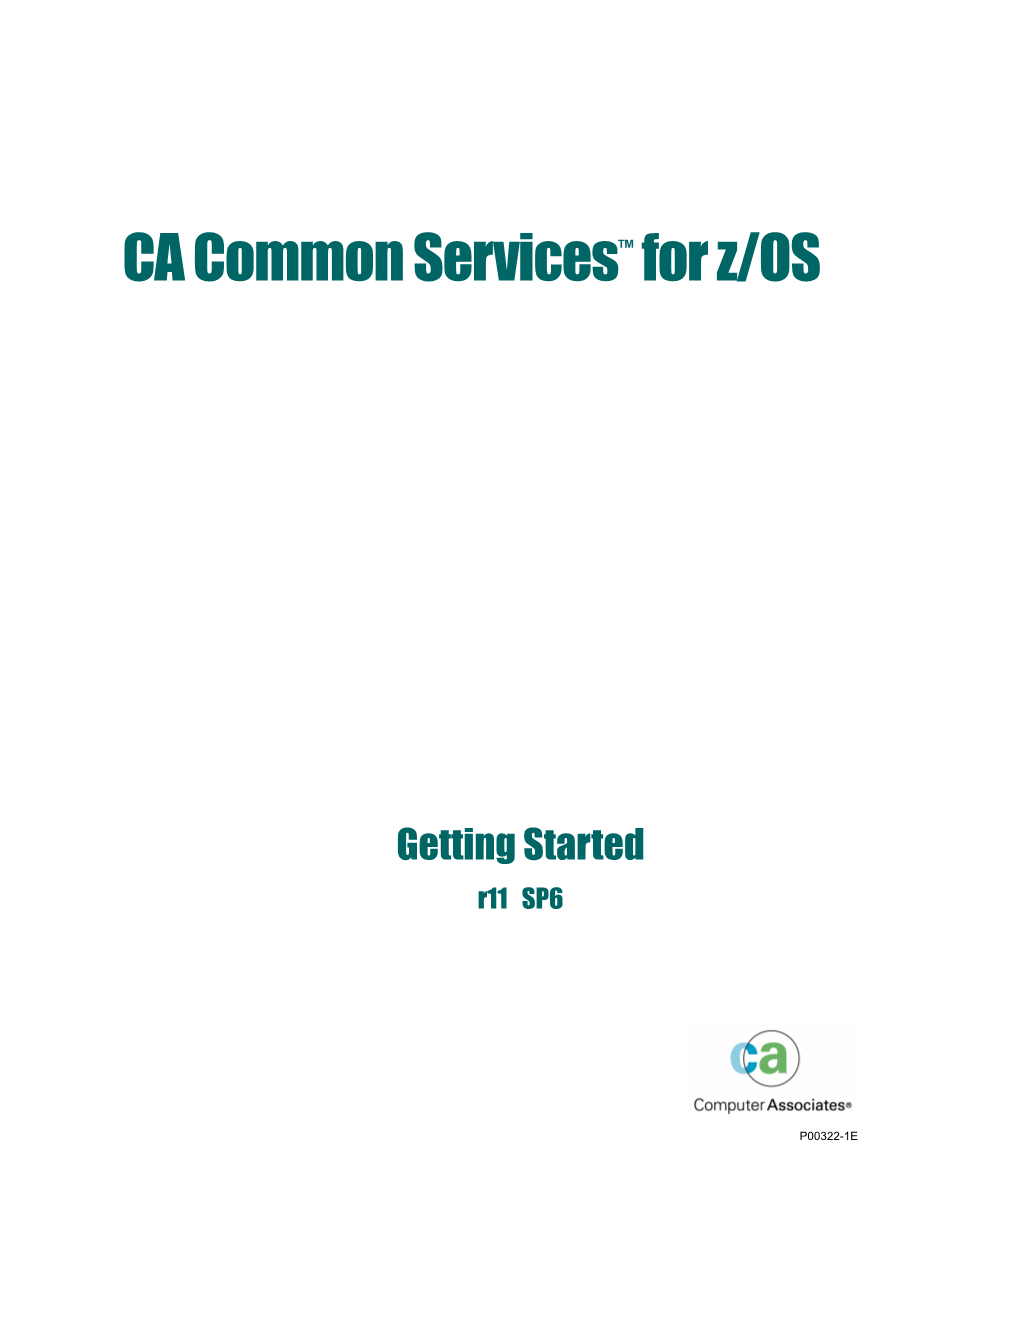 CA Common Services for Z/OS Getting Started